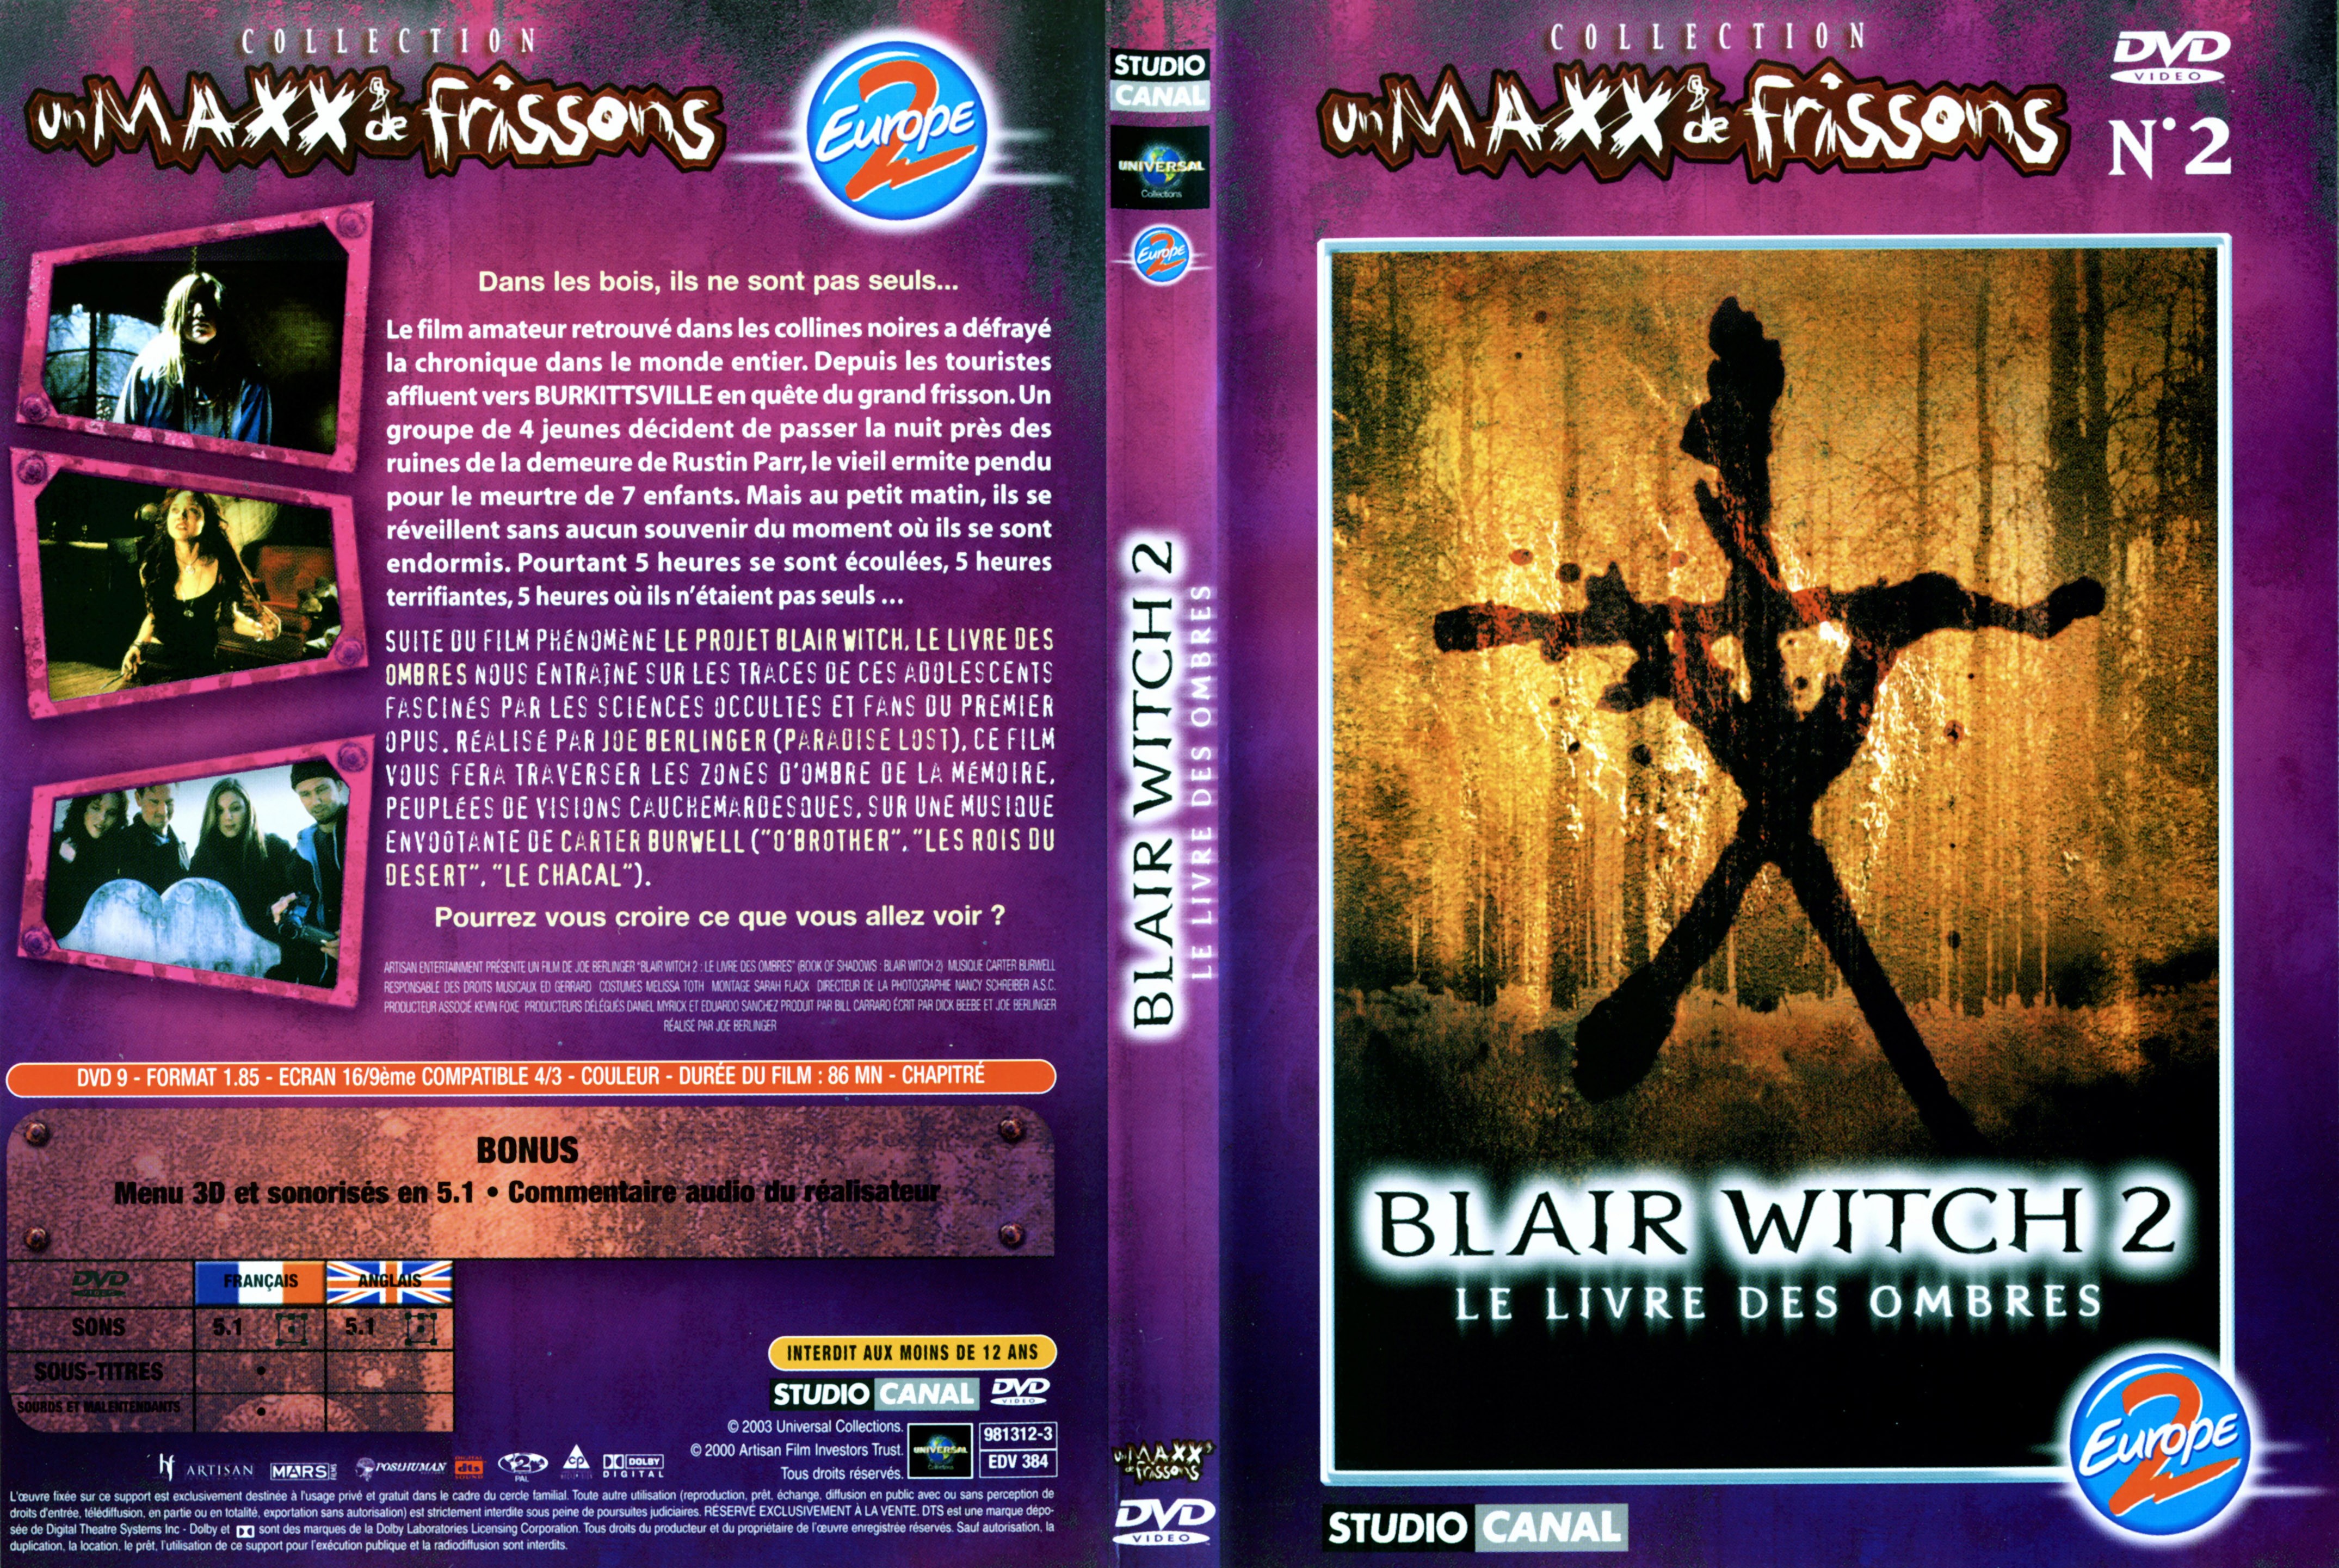 Jaquette DVD Blair Witch 2 v2